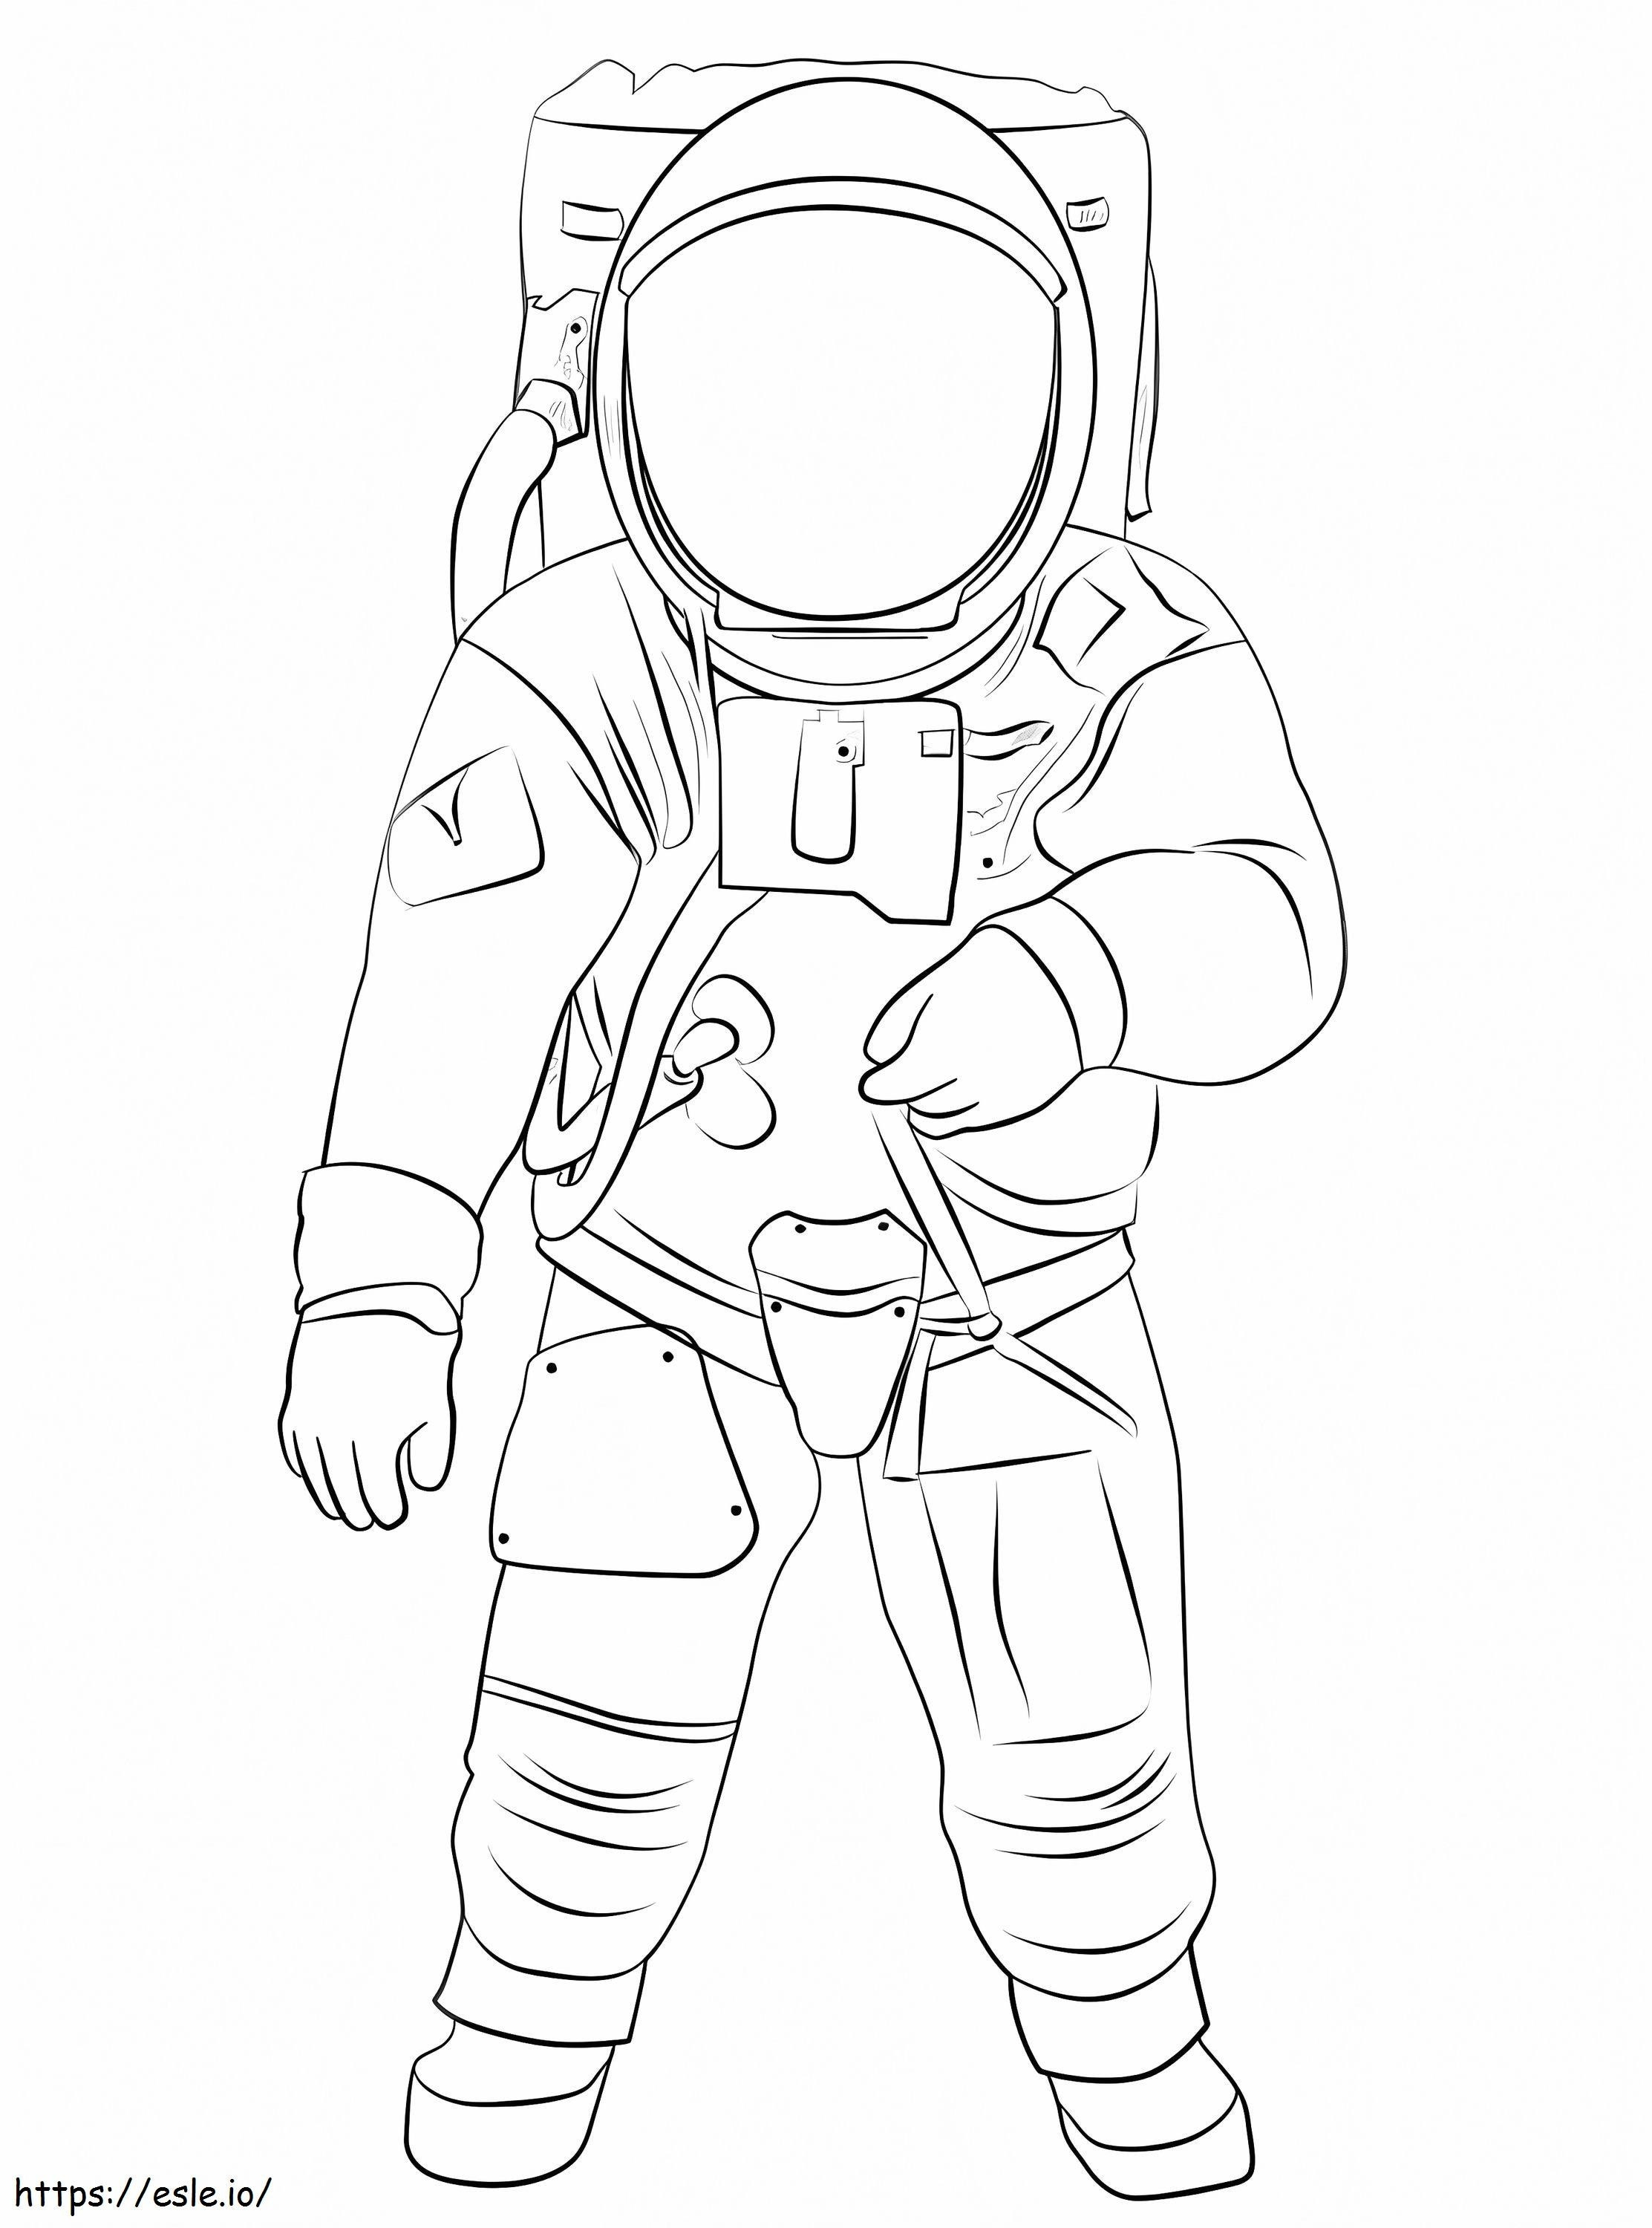 Normal Astronaut coloring page